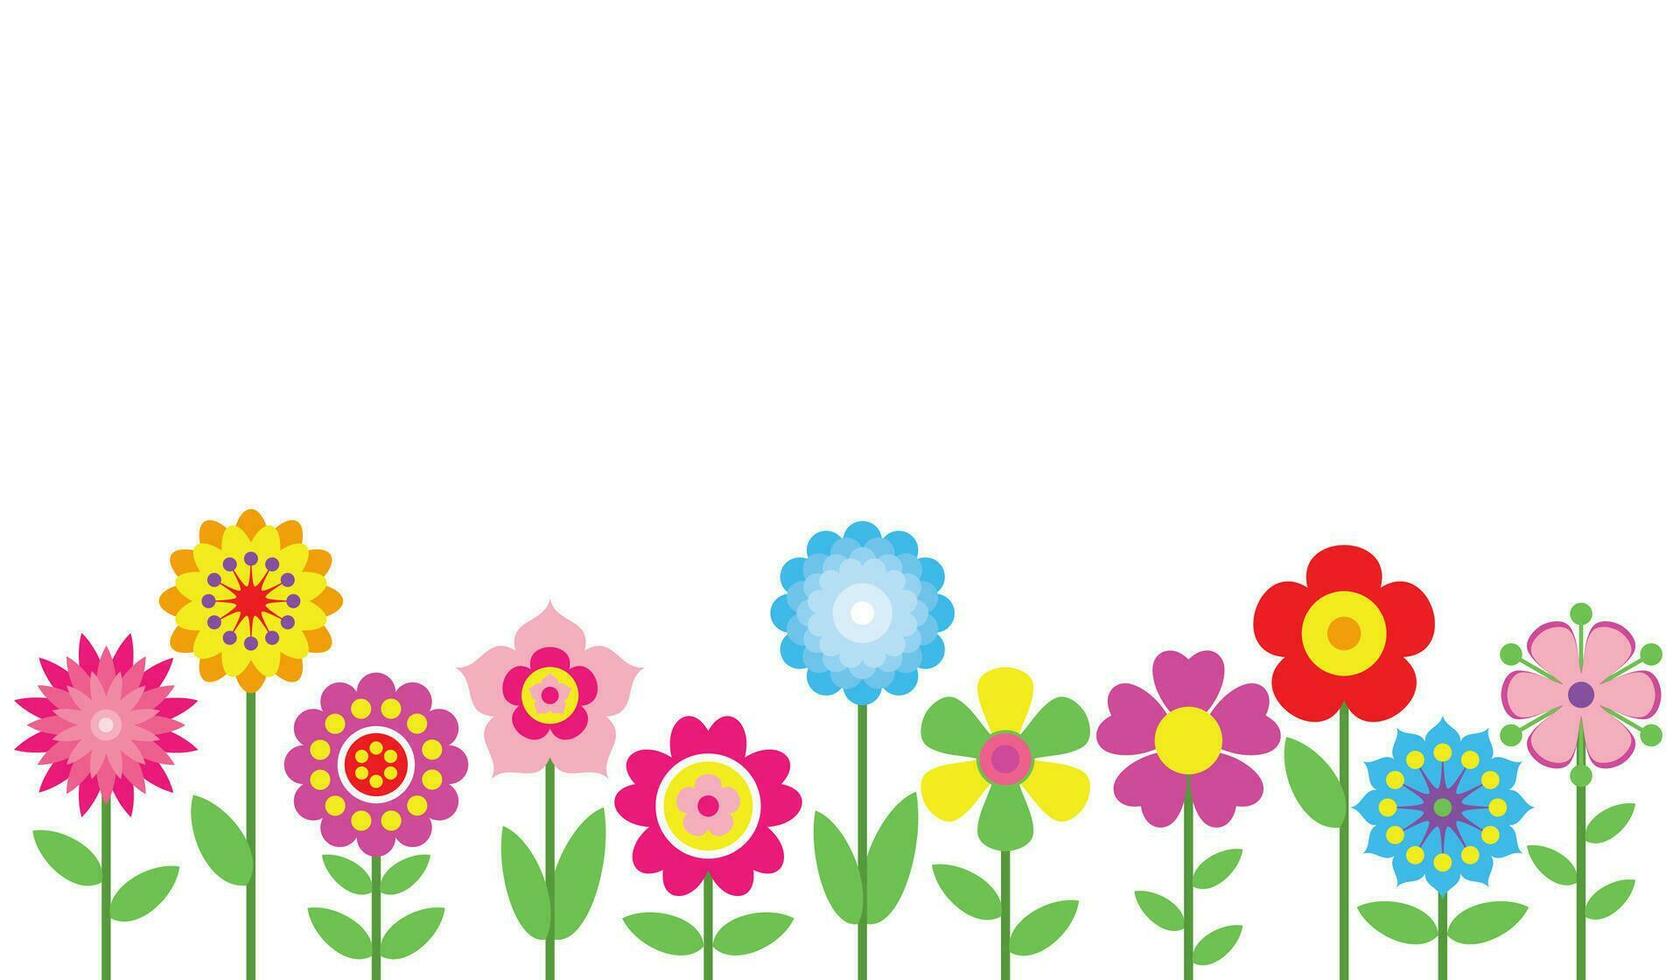 Spring flowers border isolated on white background. Simple colorful floral icons in bright colors. Decorative flower silhouette collection. Horizontal white banner. Vector illustration.